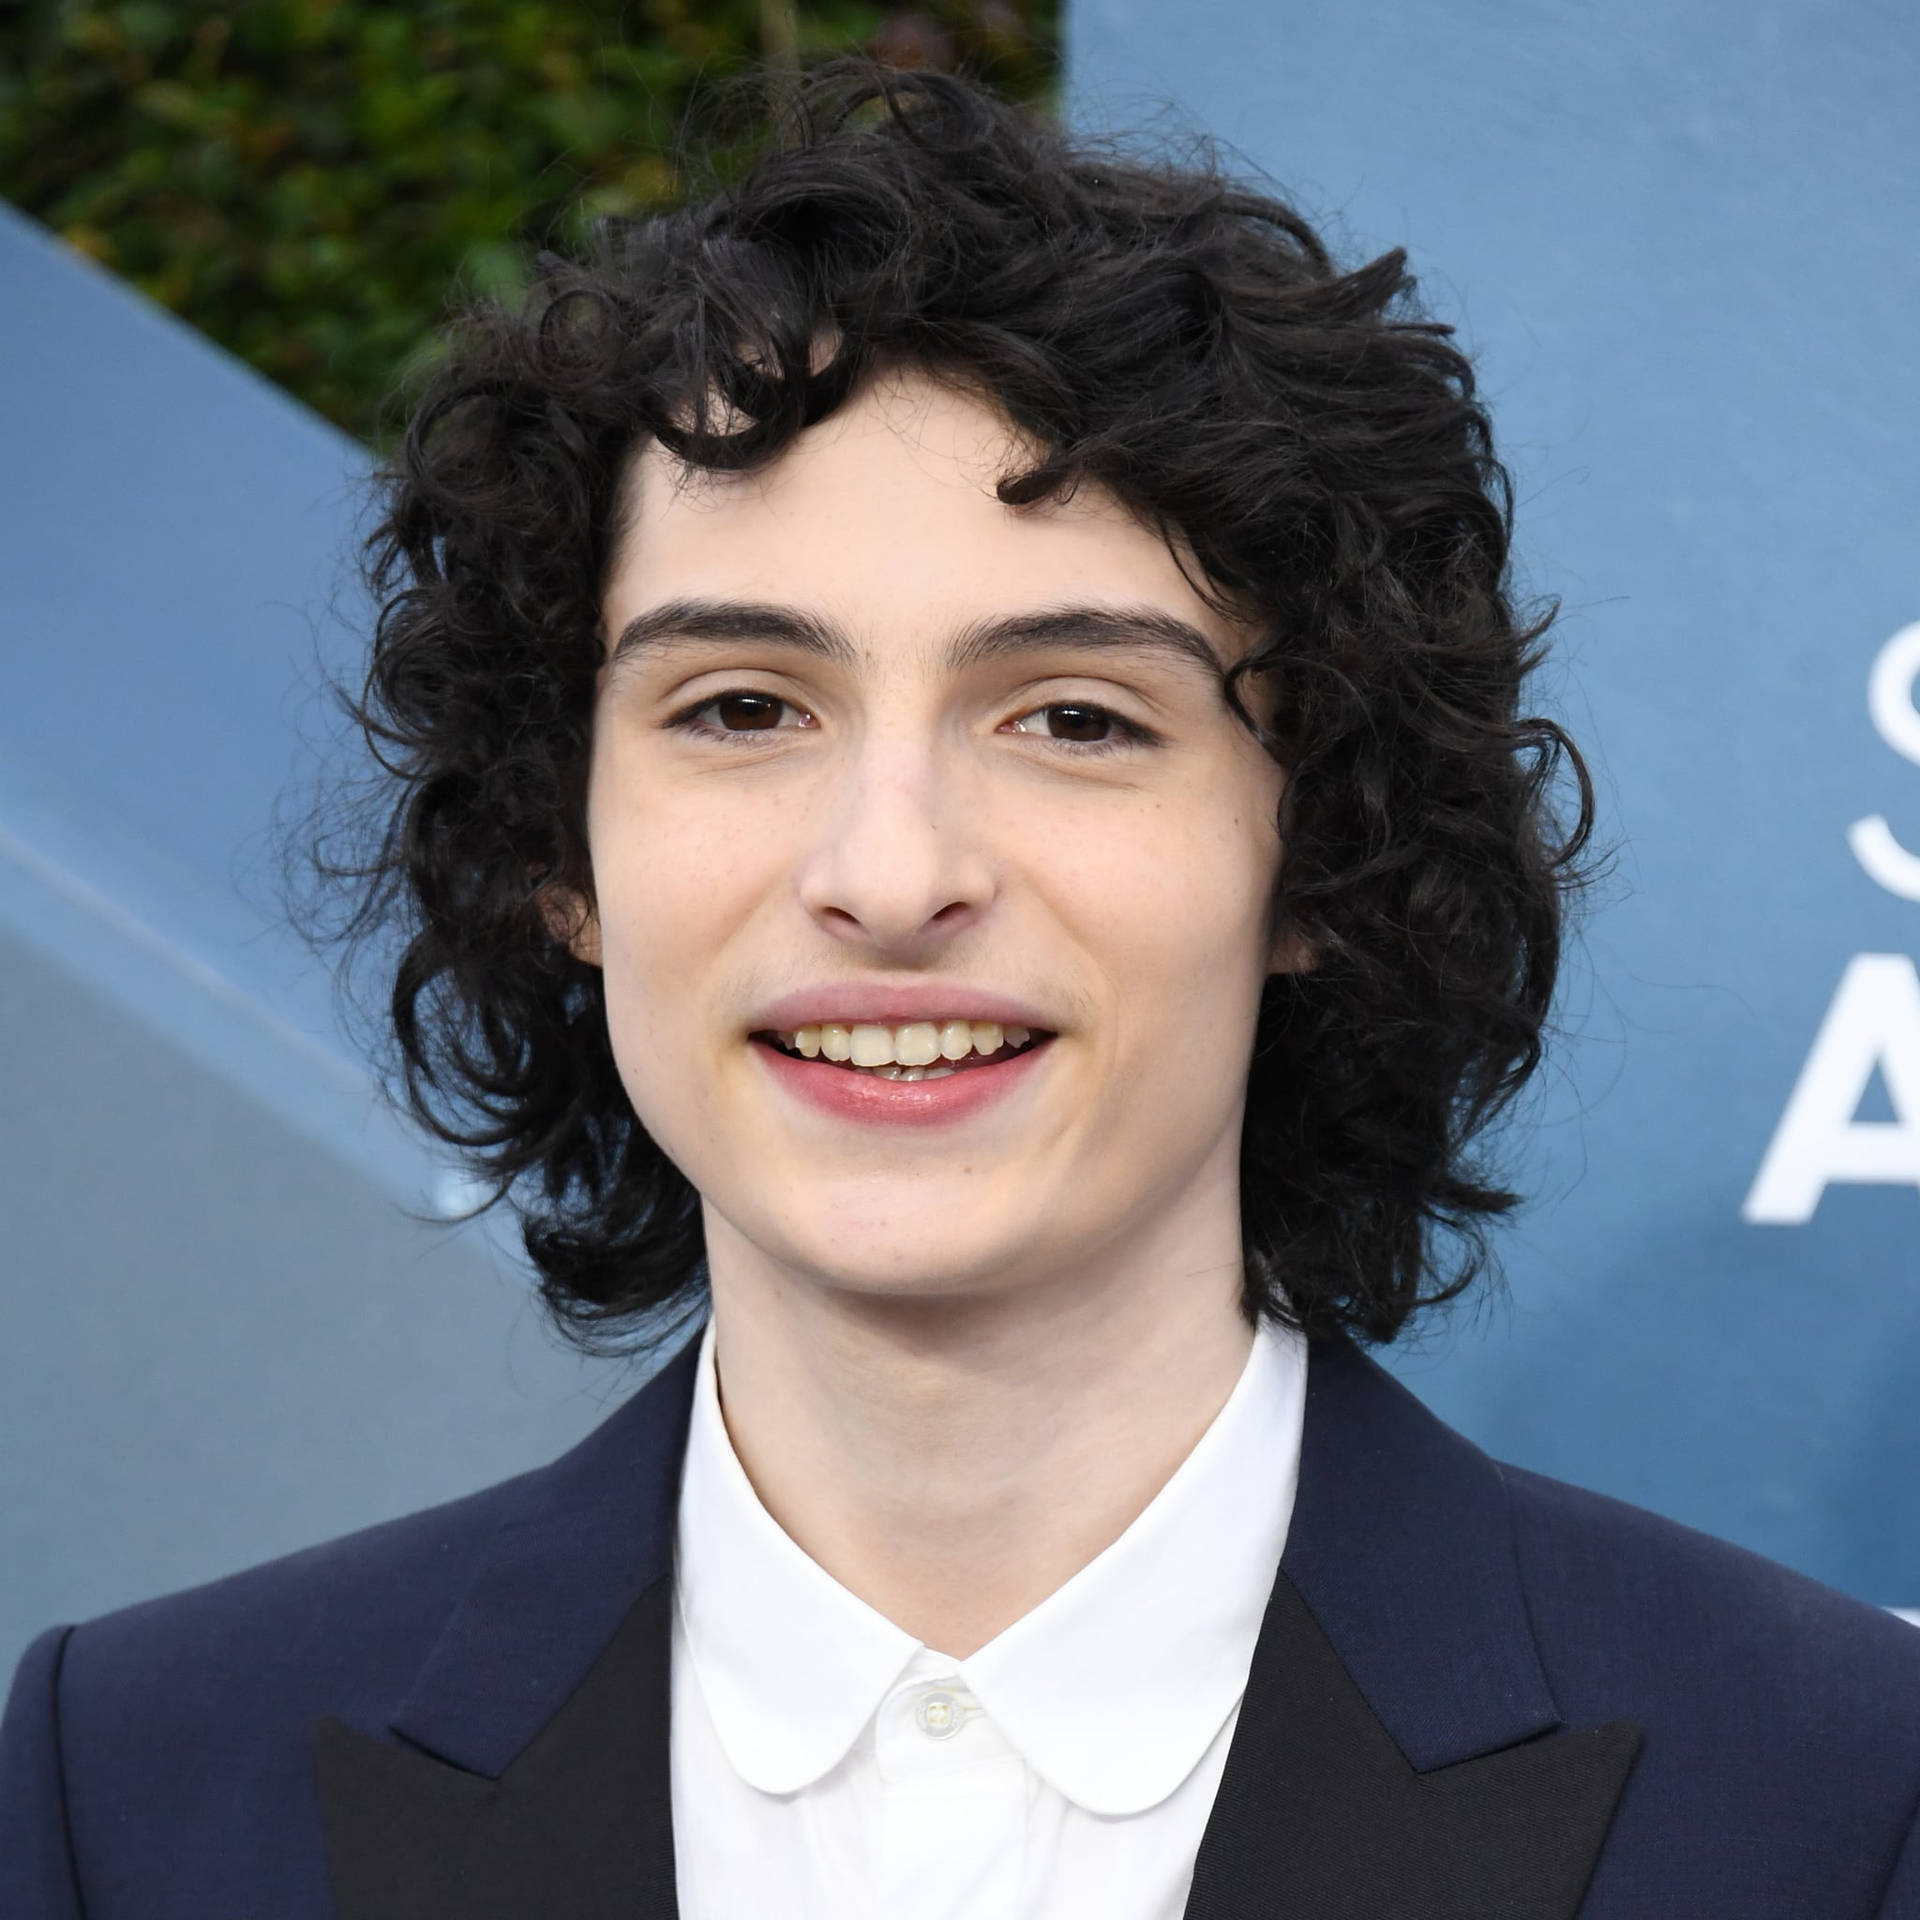 Finn Wolfhard In Coat And Tie Background